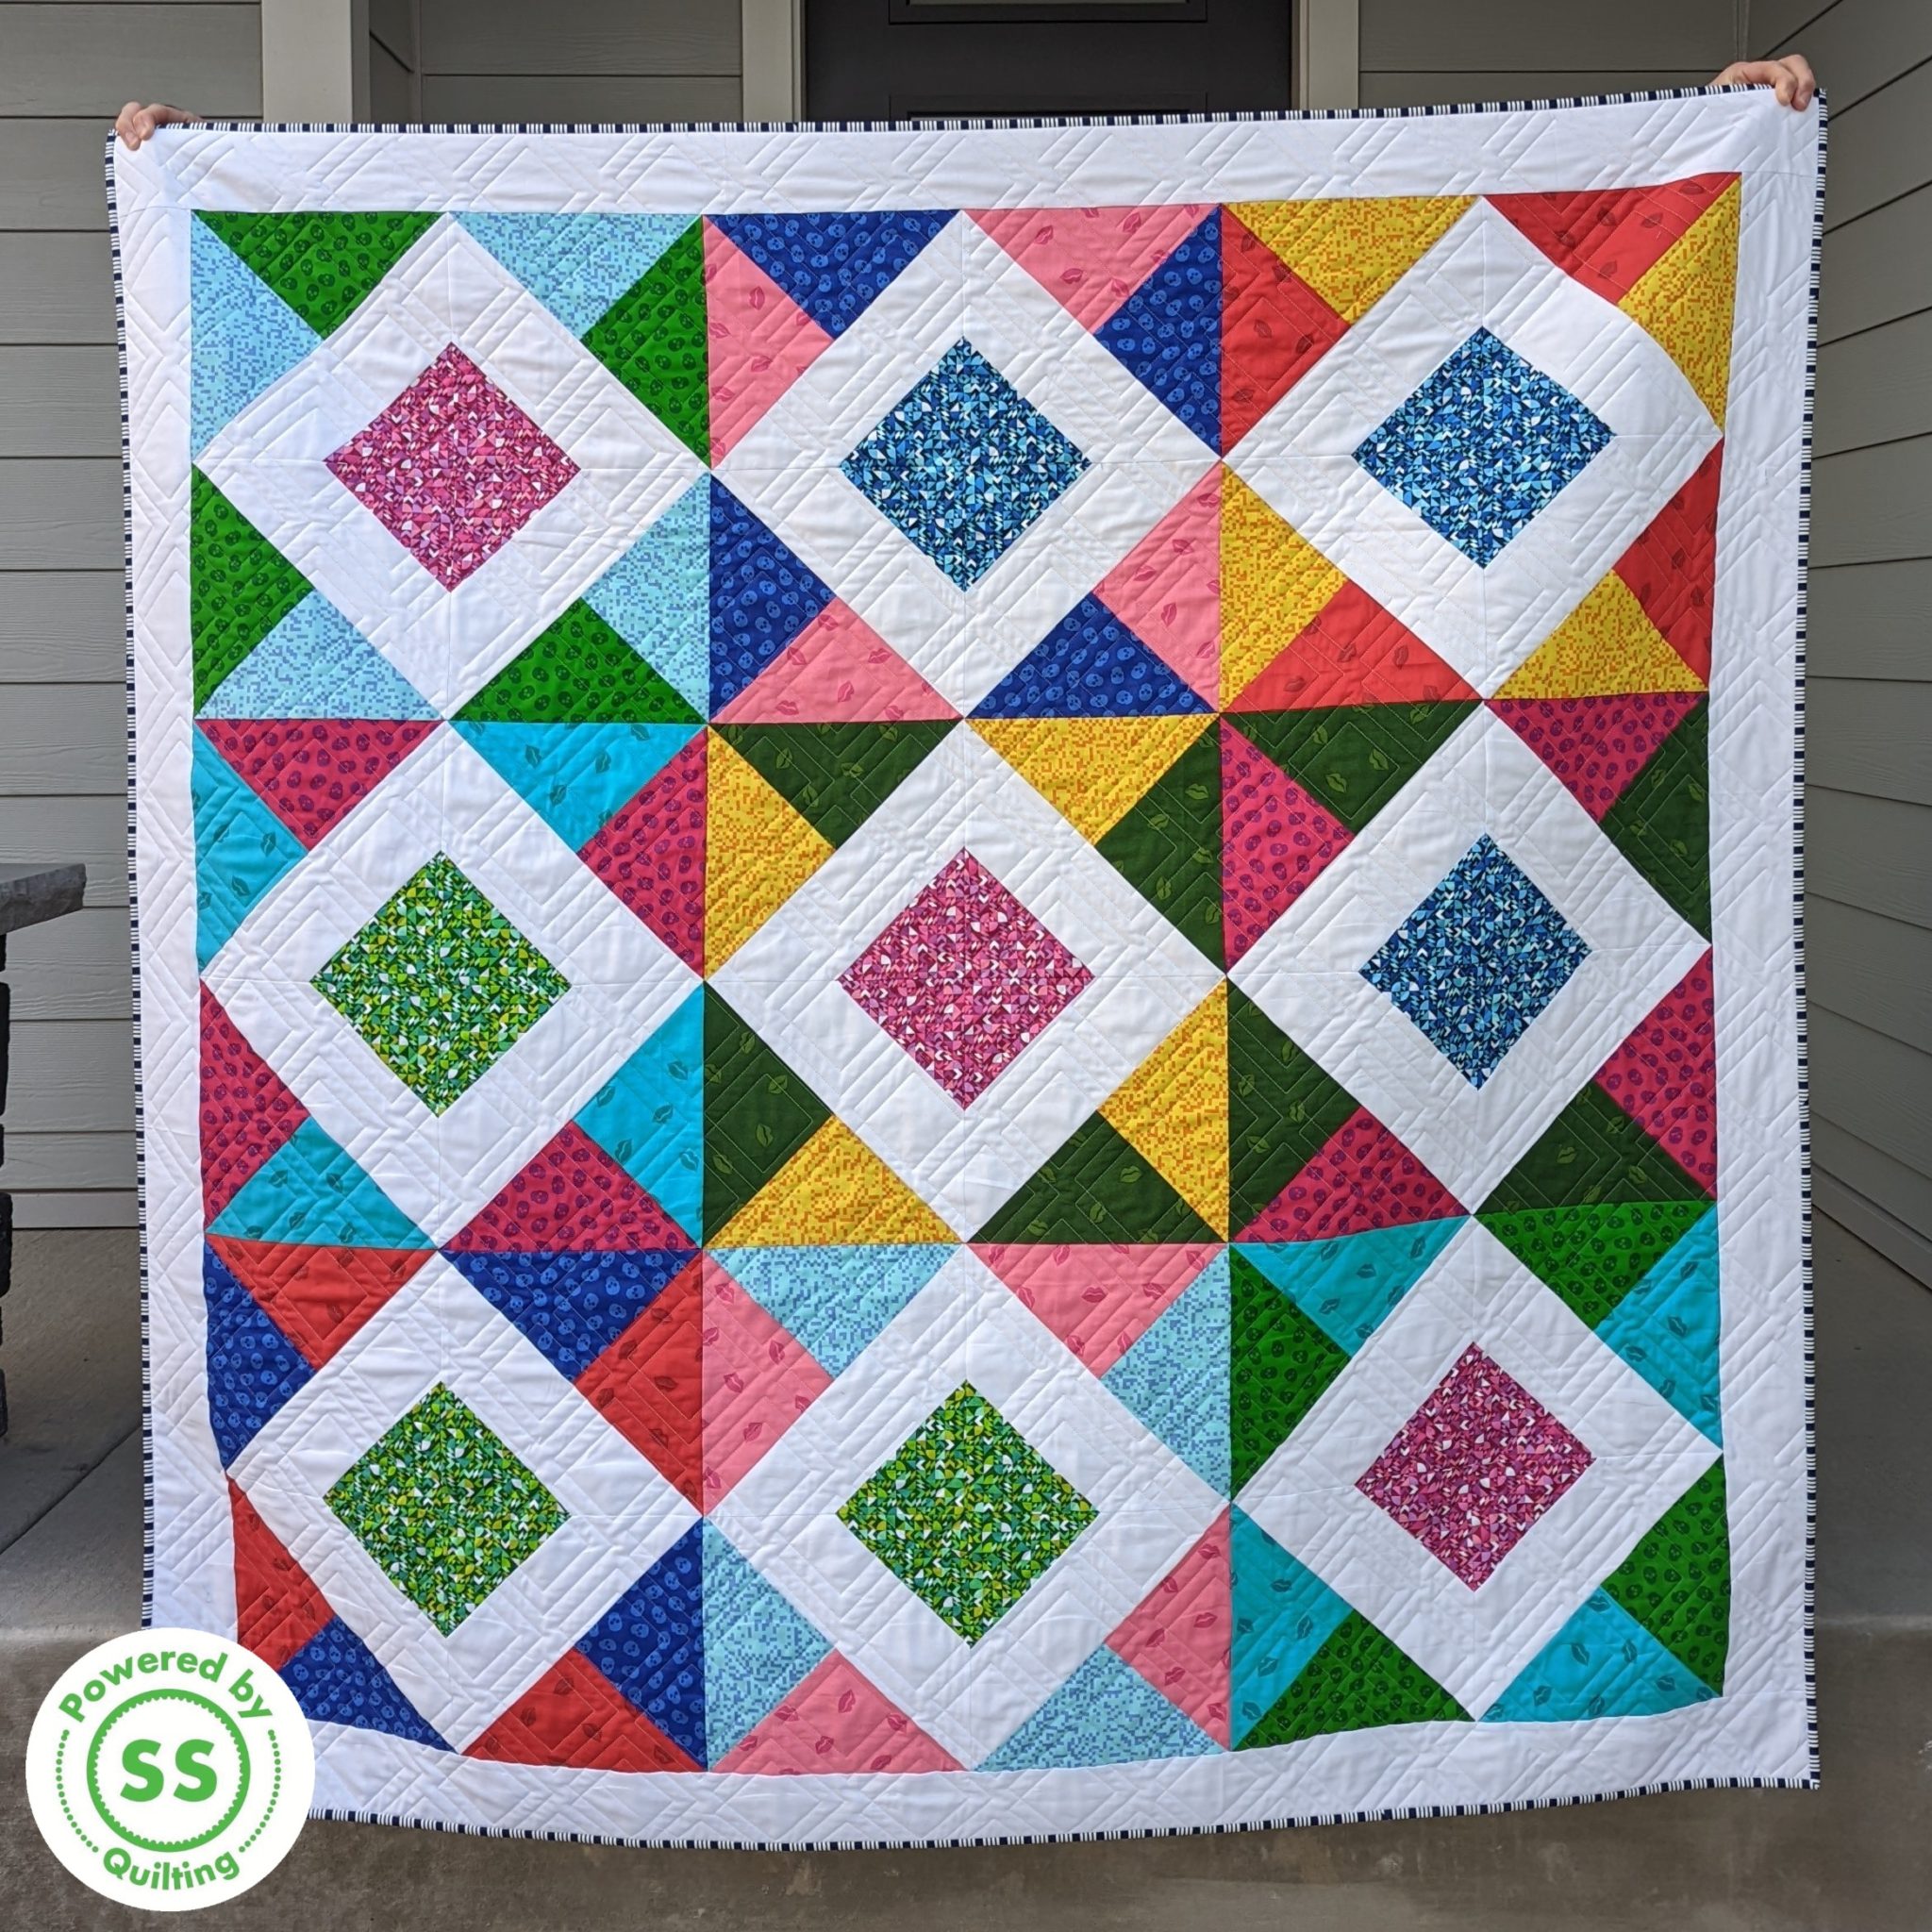 quilting frame question - Quiltingboard Forums